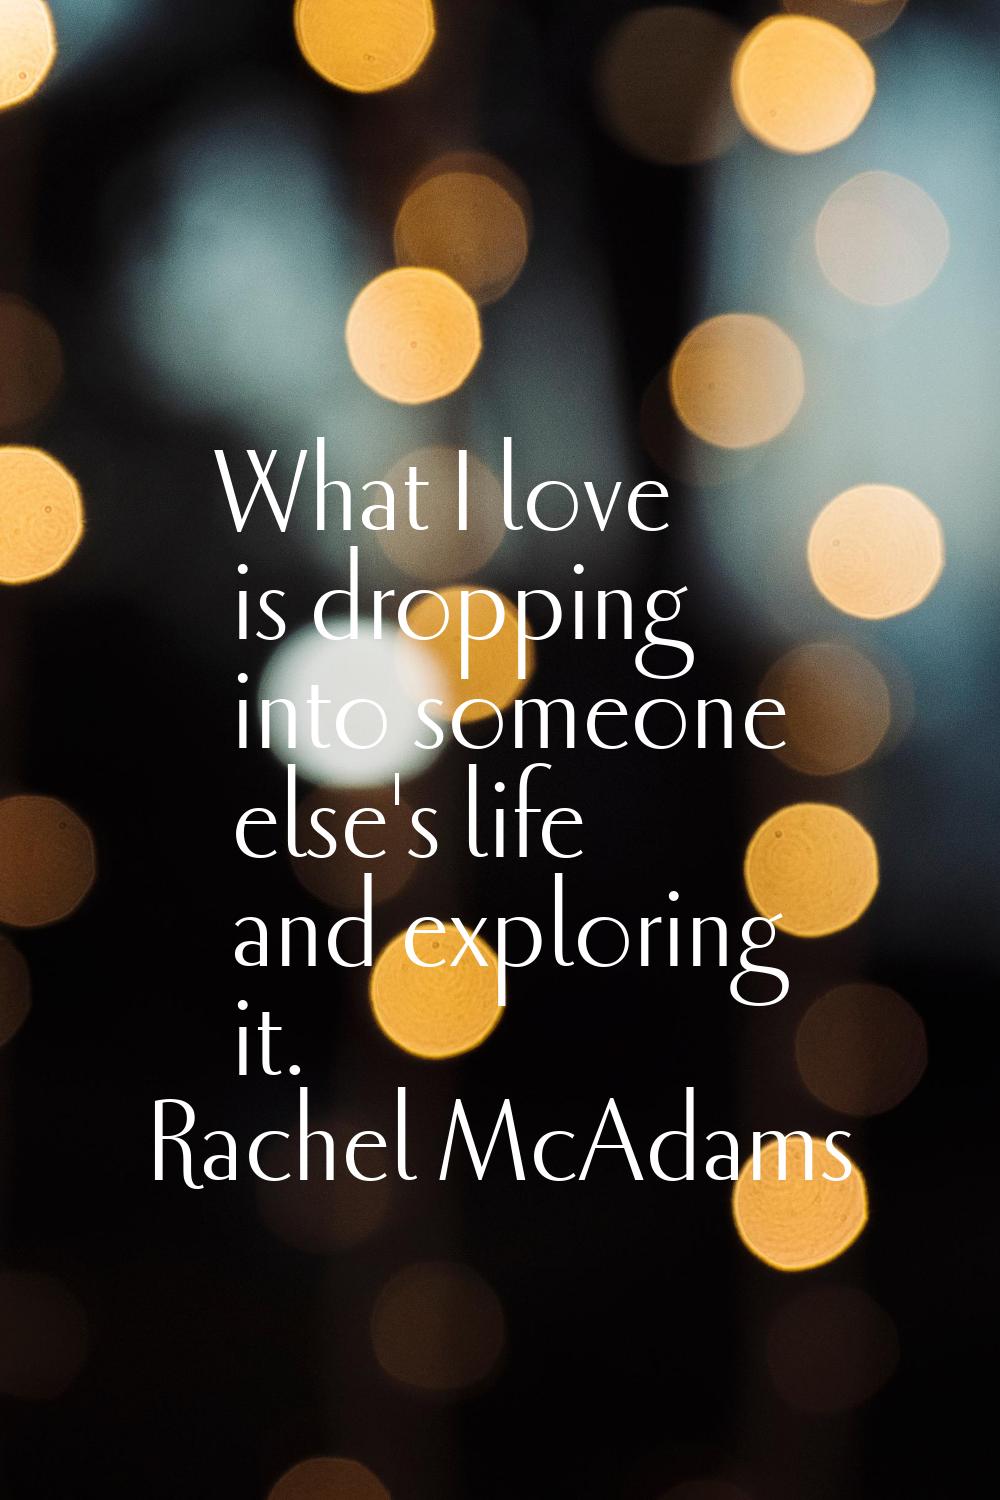 What I love is dropping into someone else's life and exploring it.